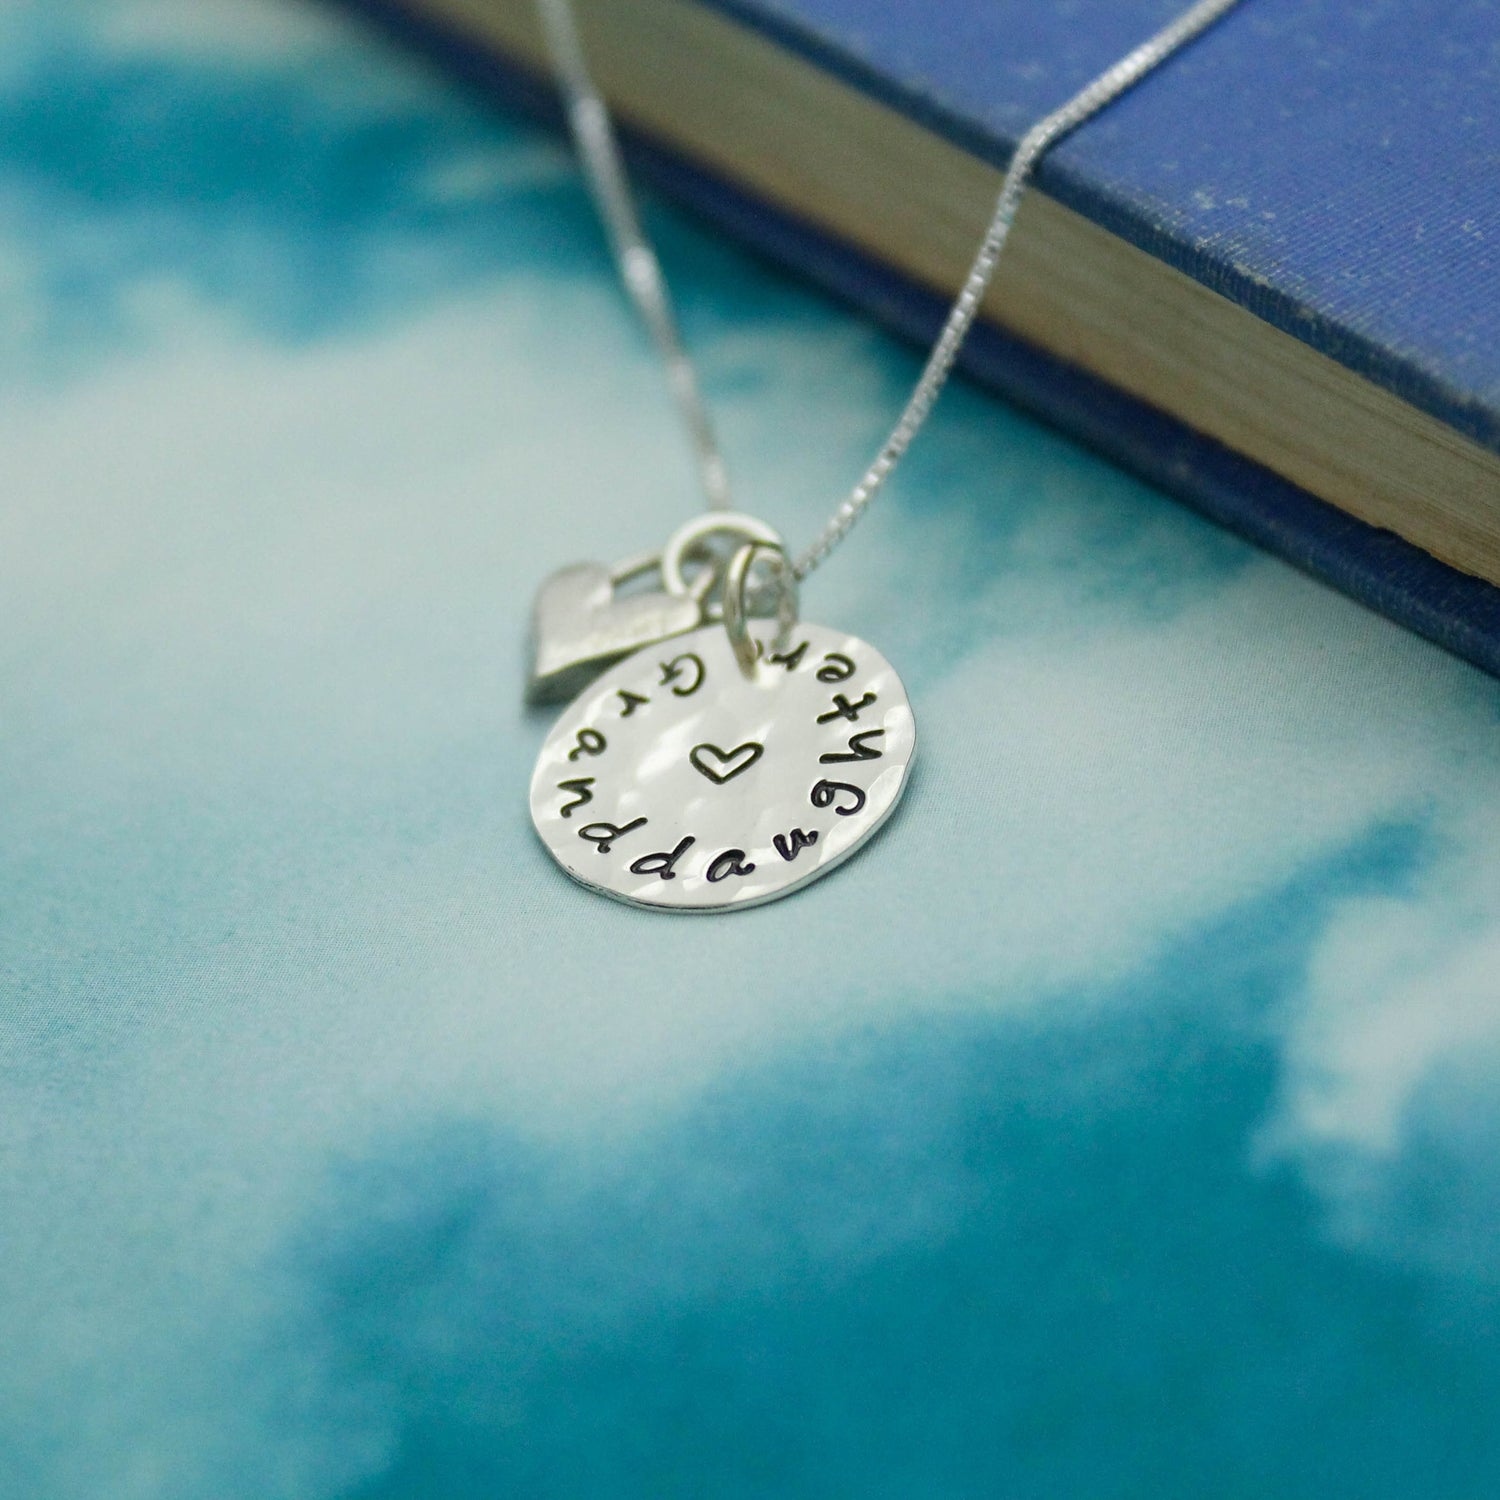 Granddaughter Necklace, Granddaughter Necklace Gift, Sterling Silver Granddaughter Hand Stamped Jewelry, Cute Gift for Granddaughters